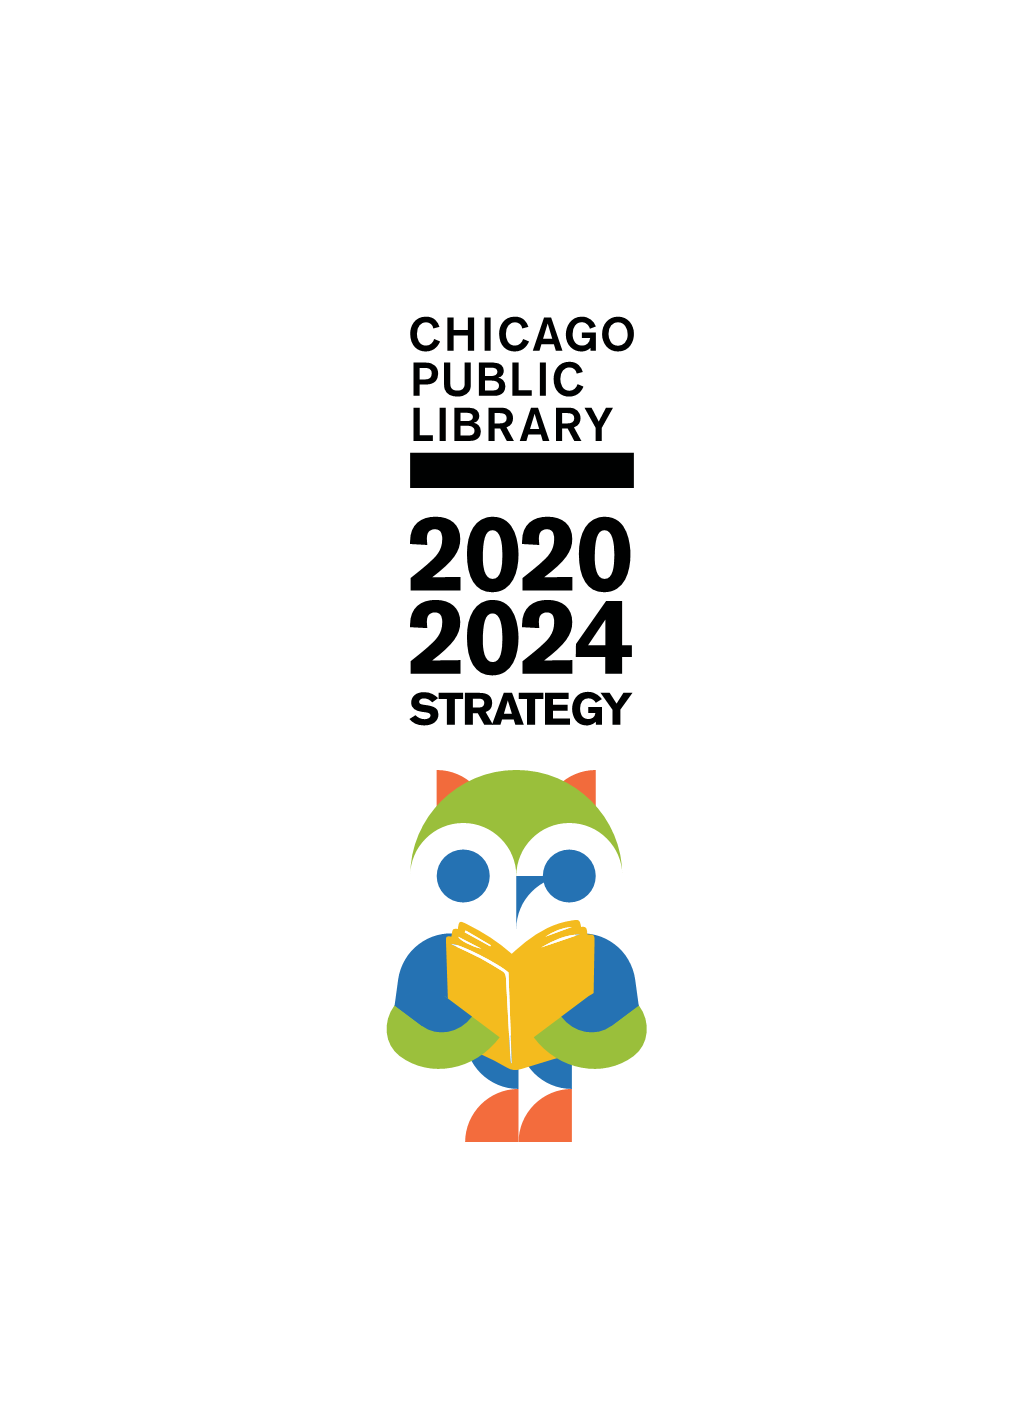 Chicago Public Library 2020-2024 Strategy